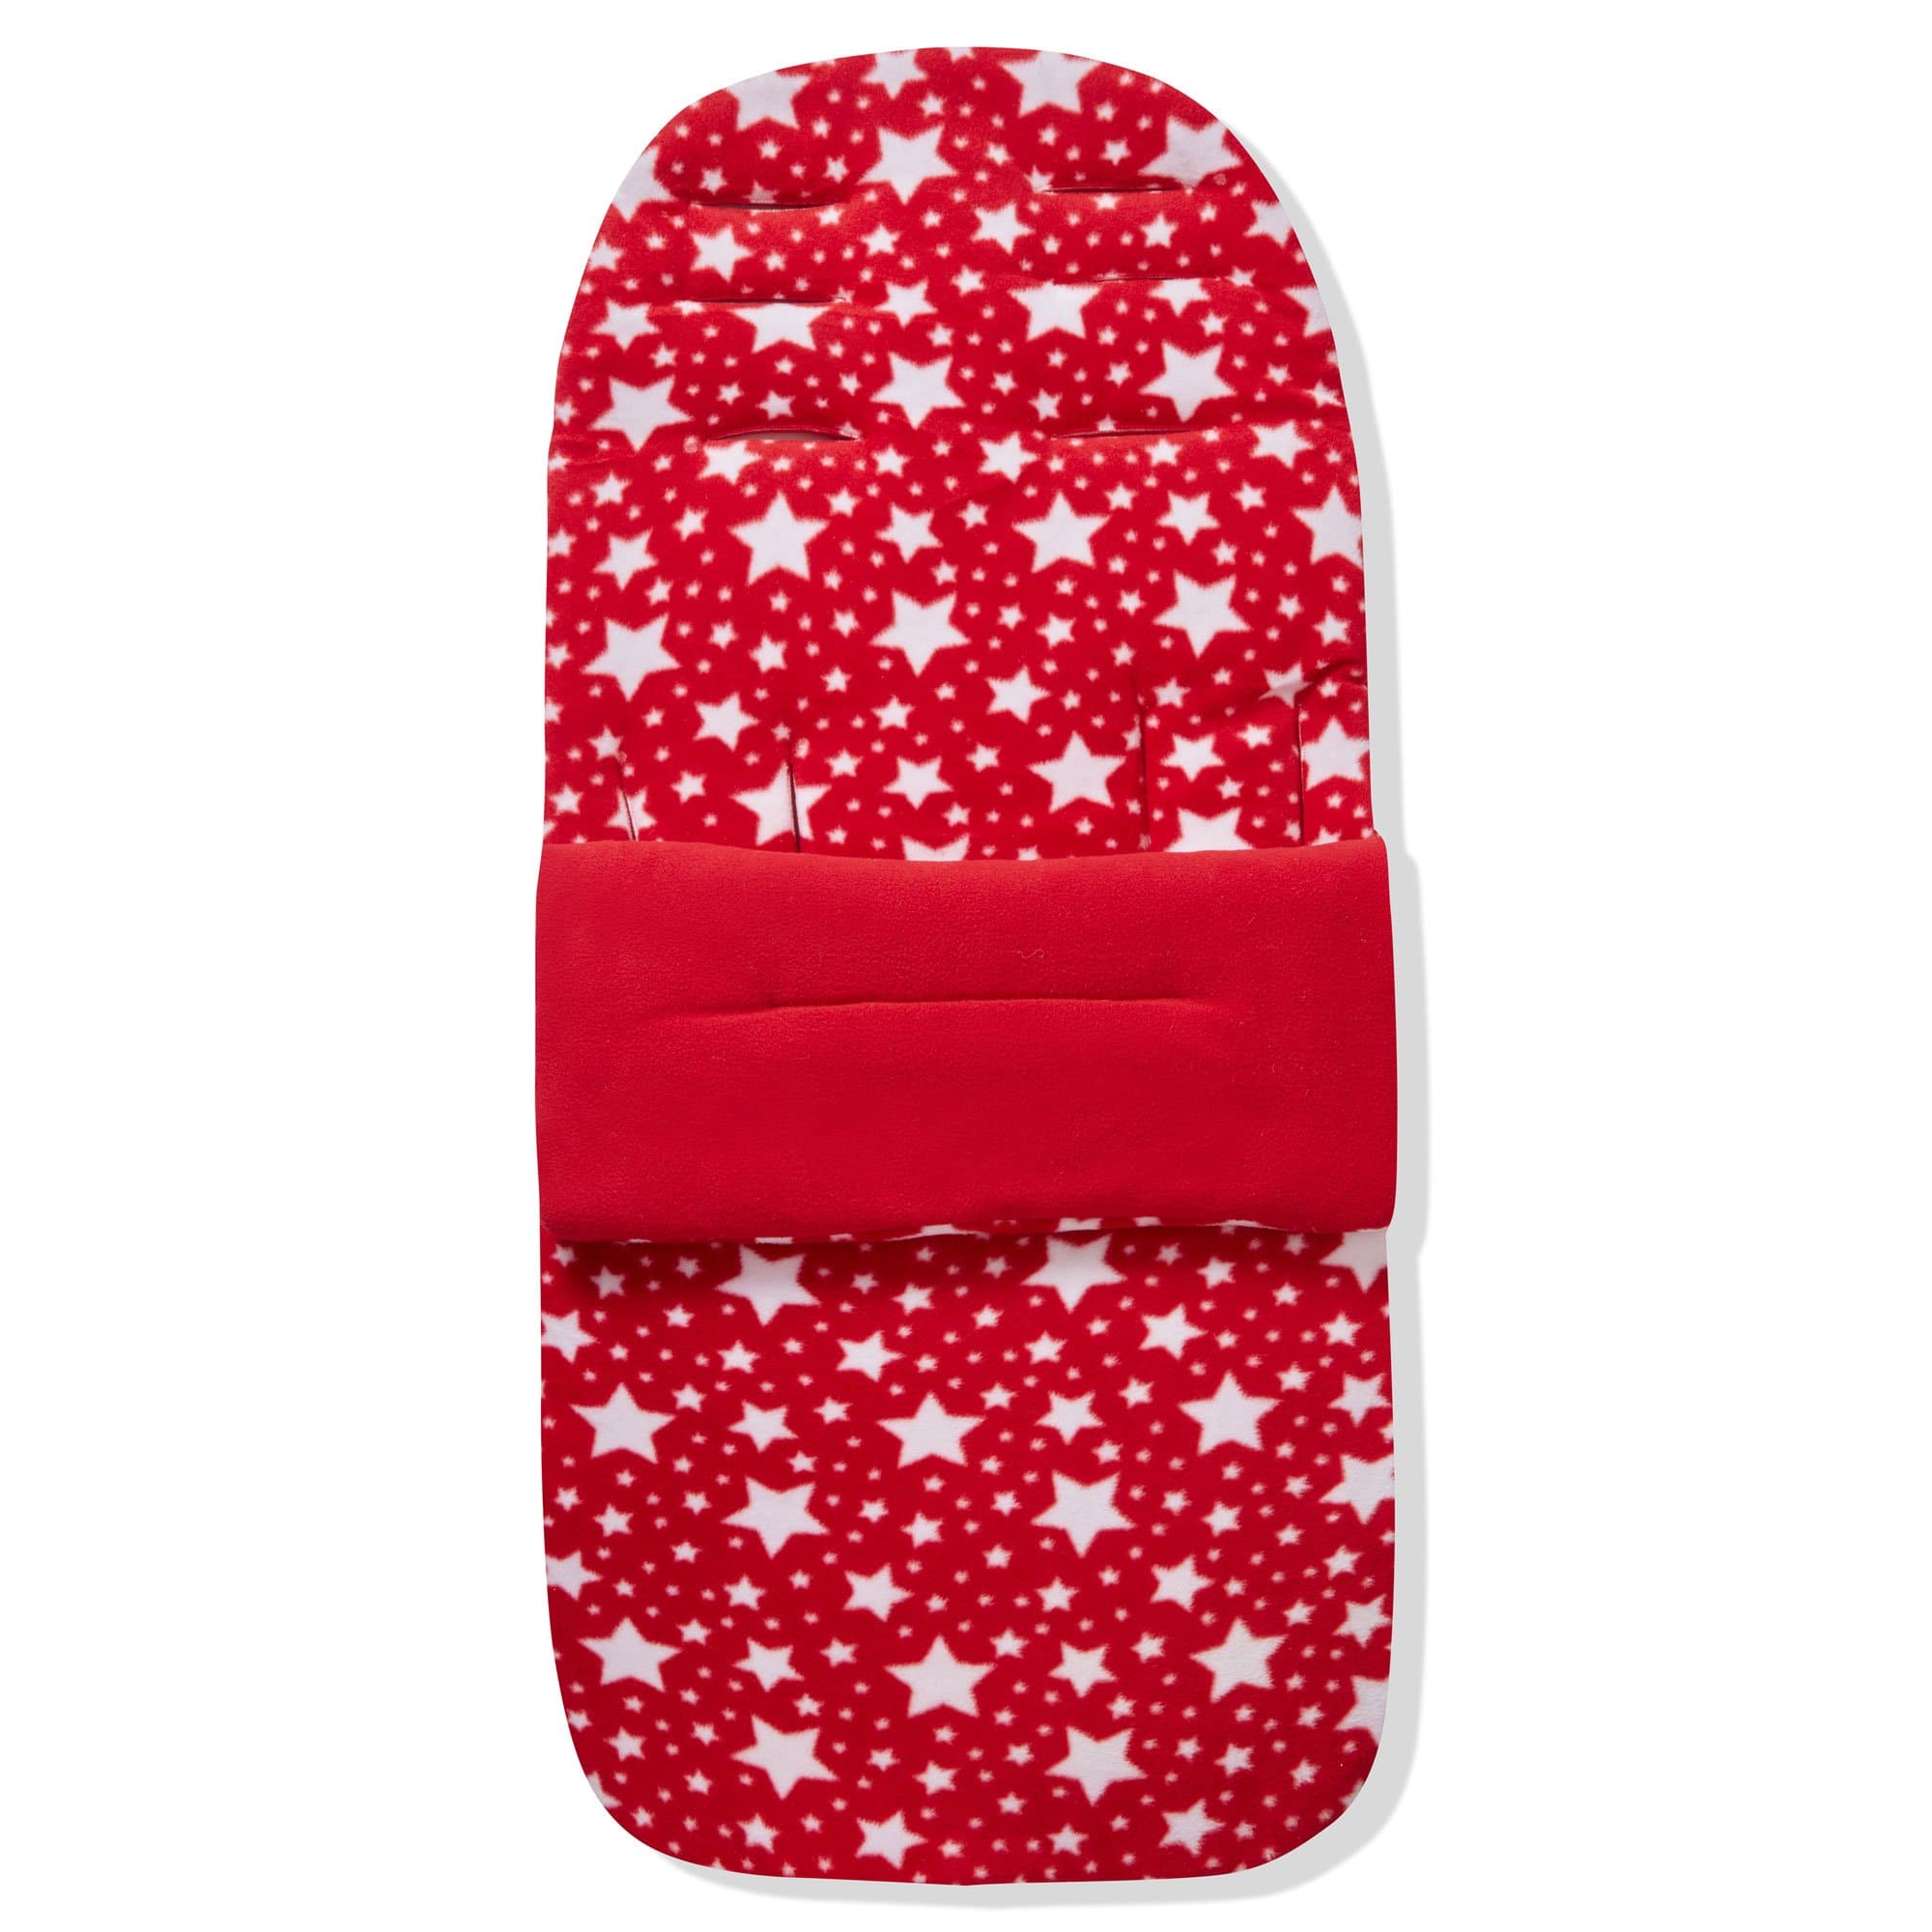 Fleece Footmuff / Cosy Toes Compatible with My Child - Red Star / Fits All Models | For Your Little One